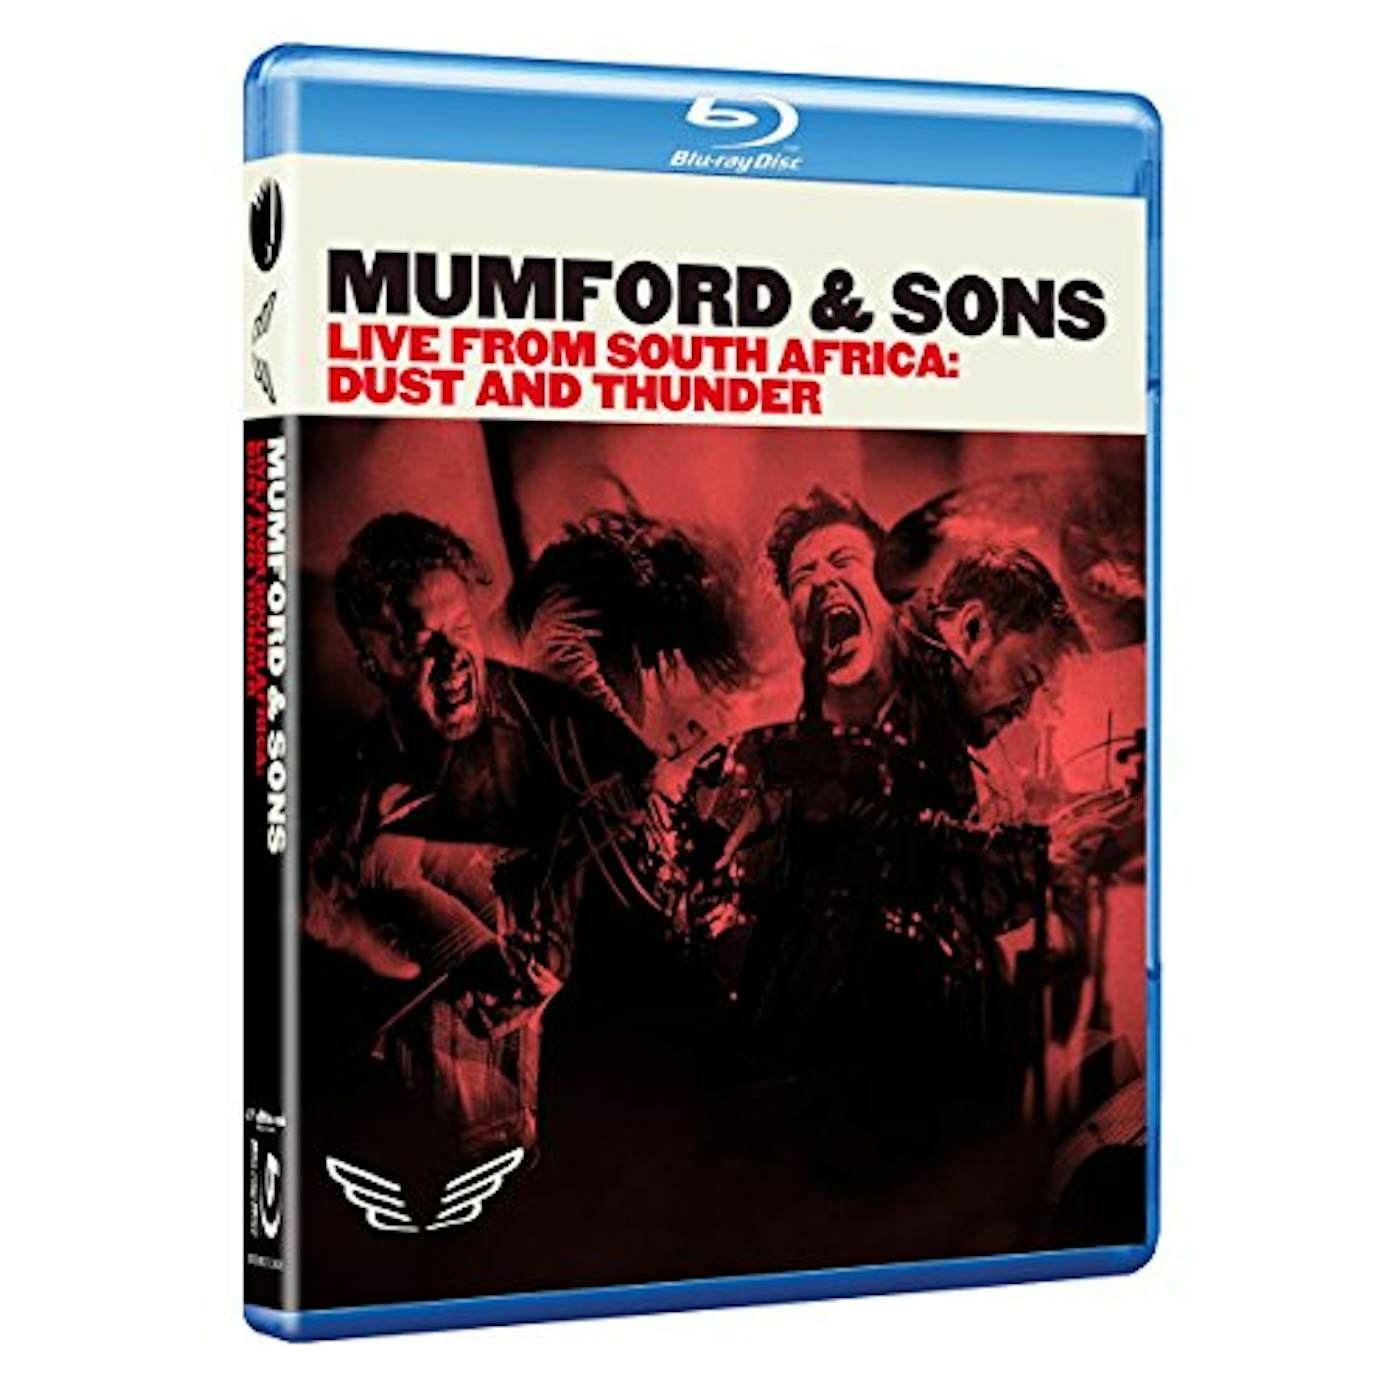 Mumford & Sons LIVE FROM SOUTH AFRICA: DUST & THUNDER Blu-ray